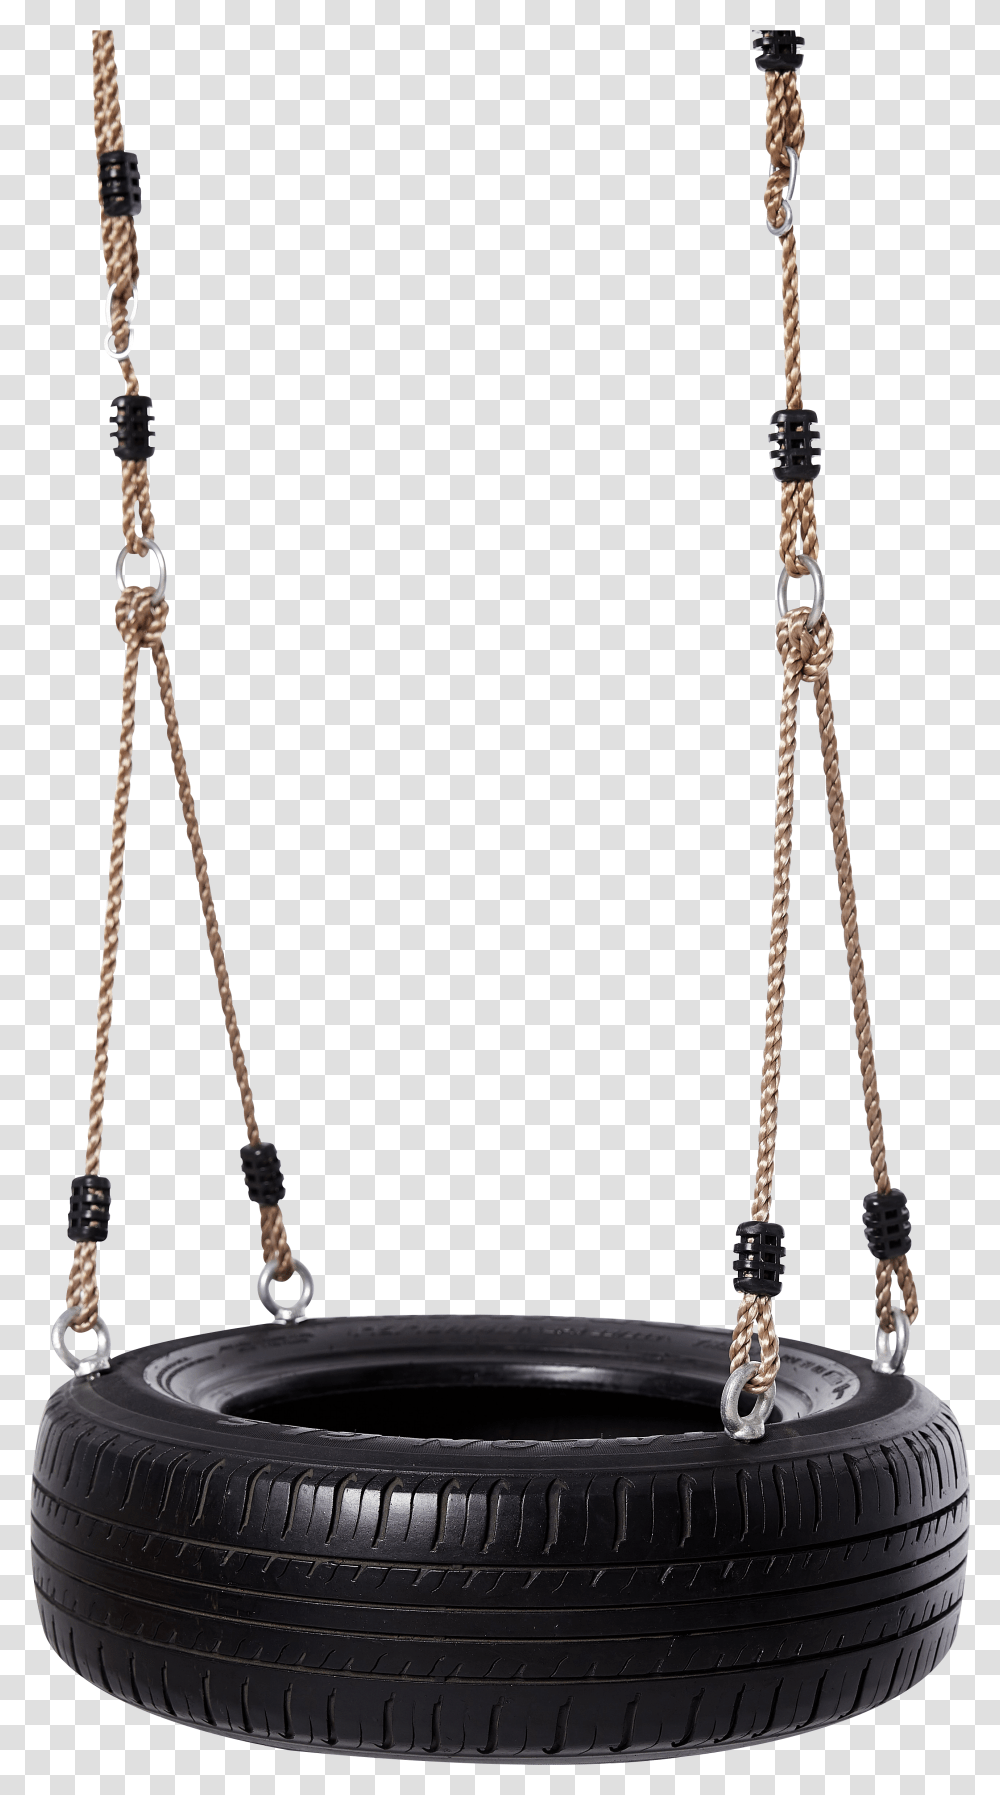 Tire Swing Transparent Png